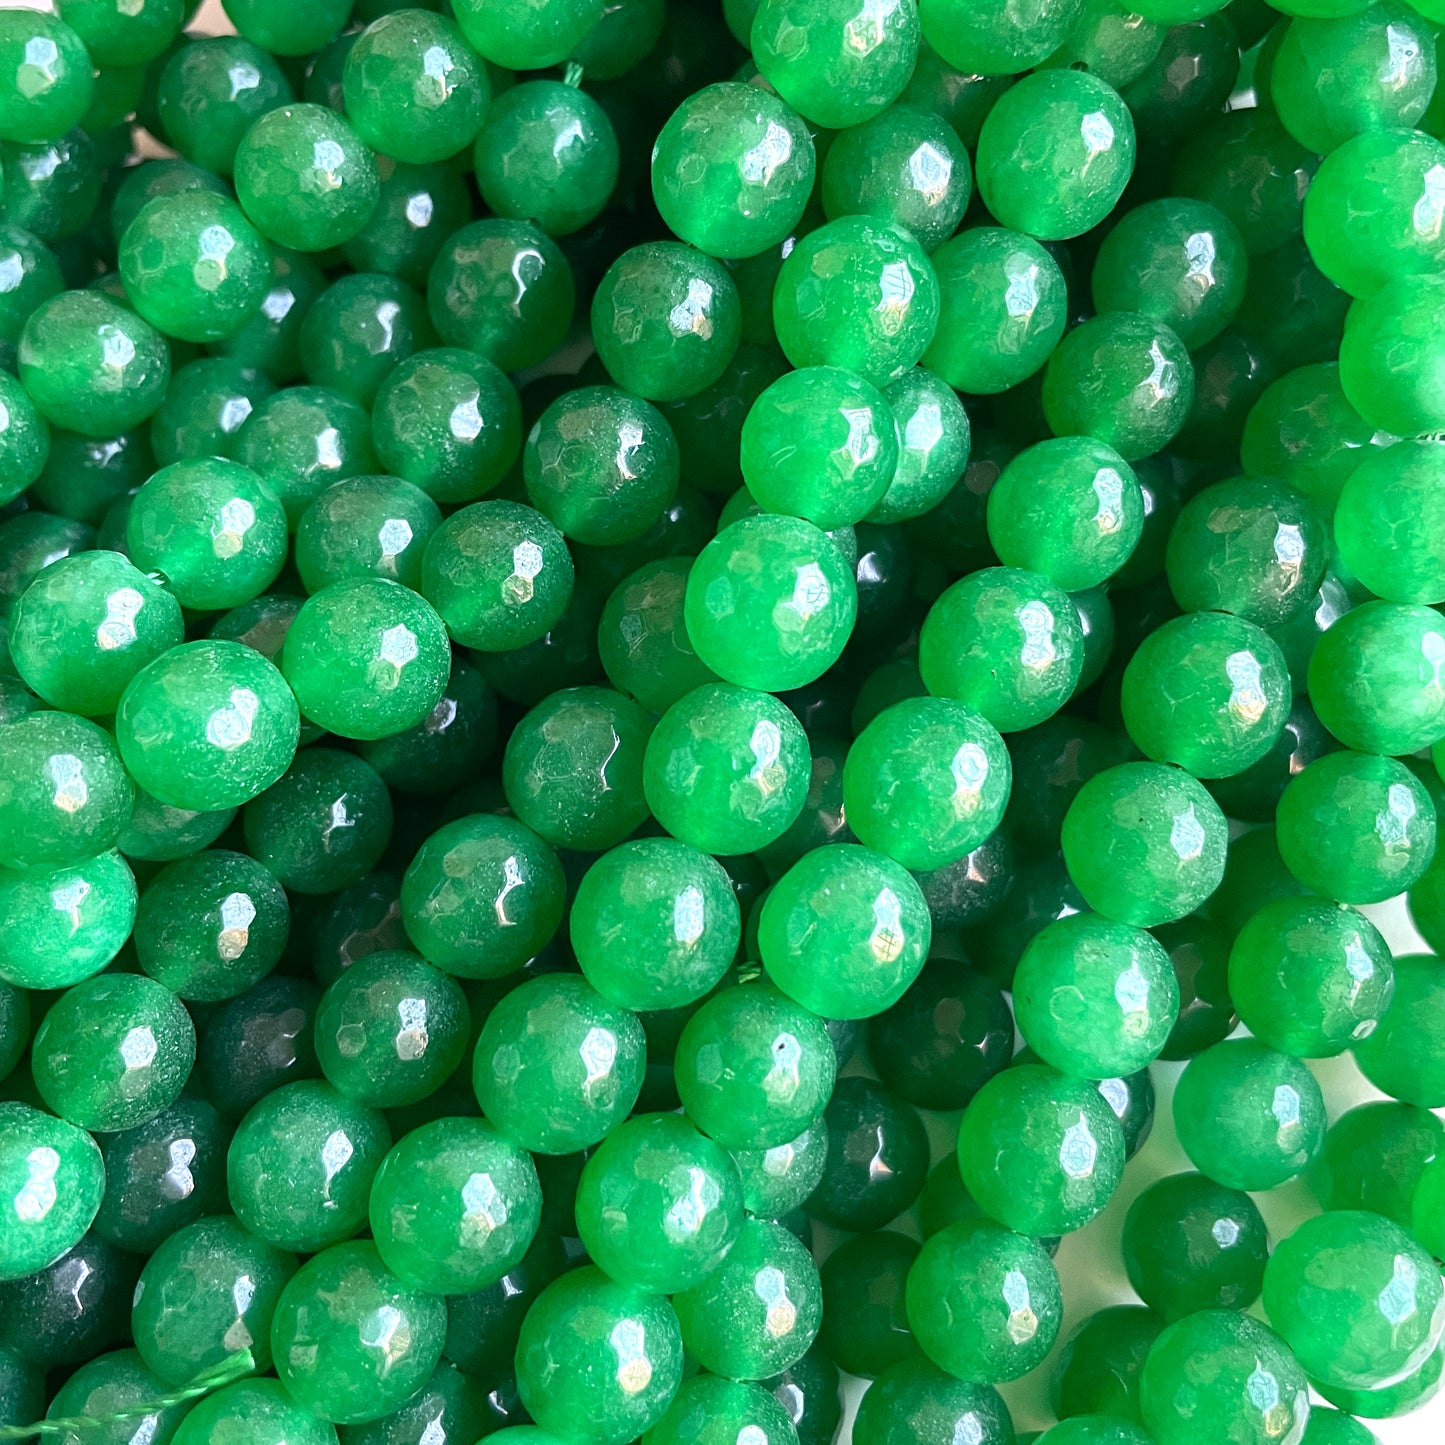 2 Strands/lot 10mm Mardi Gras Color Yellow Green Purple Jade Faceted Stone Beads 2 Strands Green Stone Beads Mardi Gras New Beads Arrivals Round Jade Beads Charms Beads Beyond